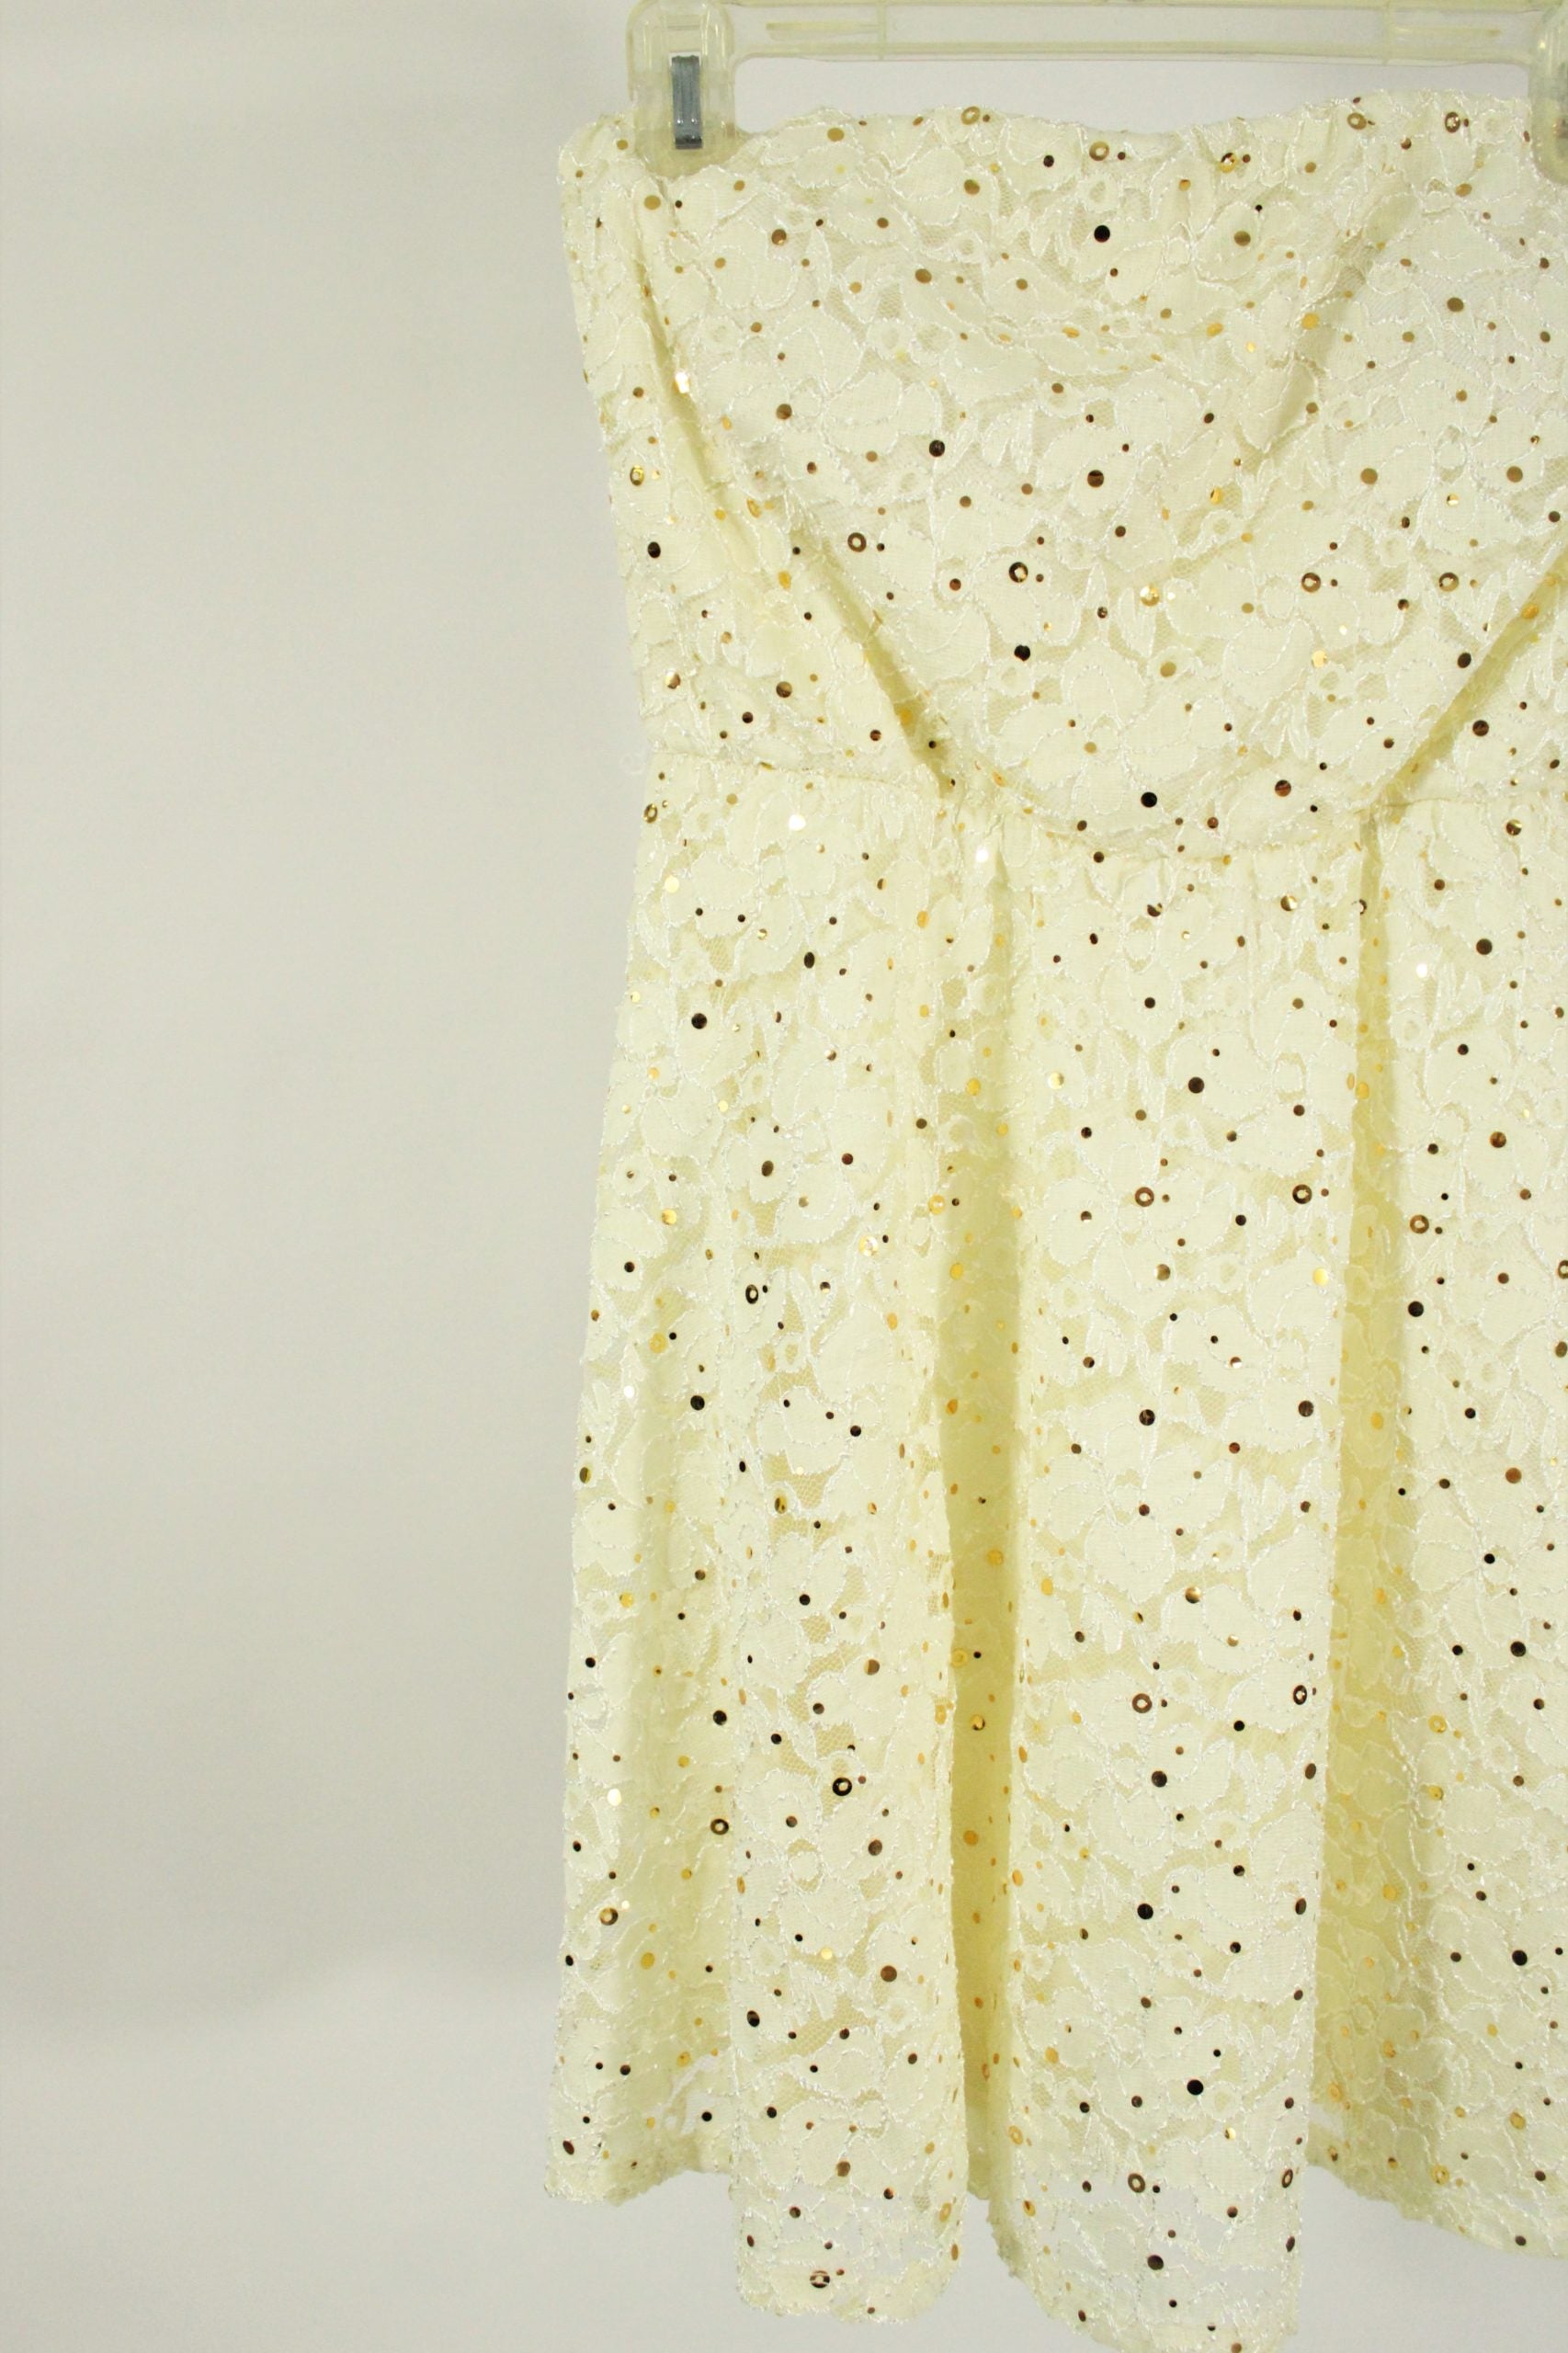 As U Wish Cream Sequined Strapless Dress | Size S